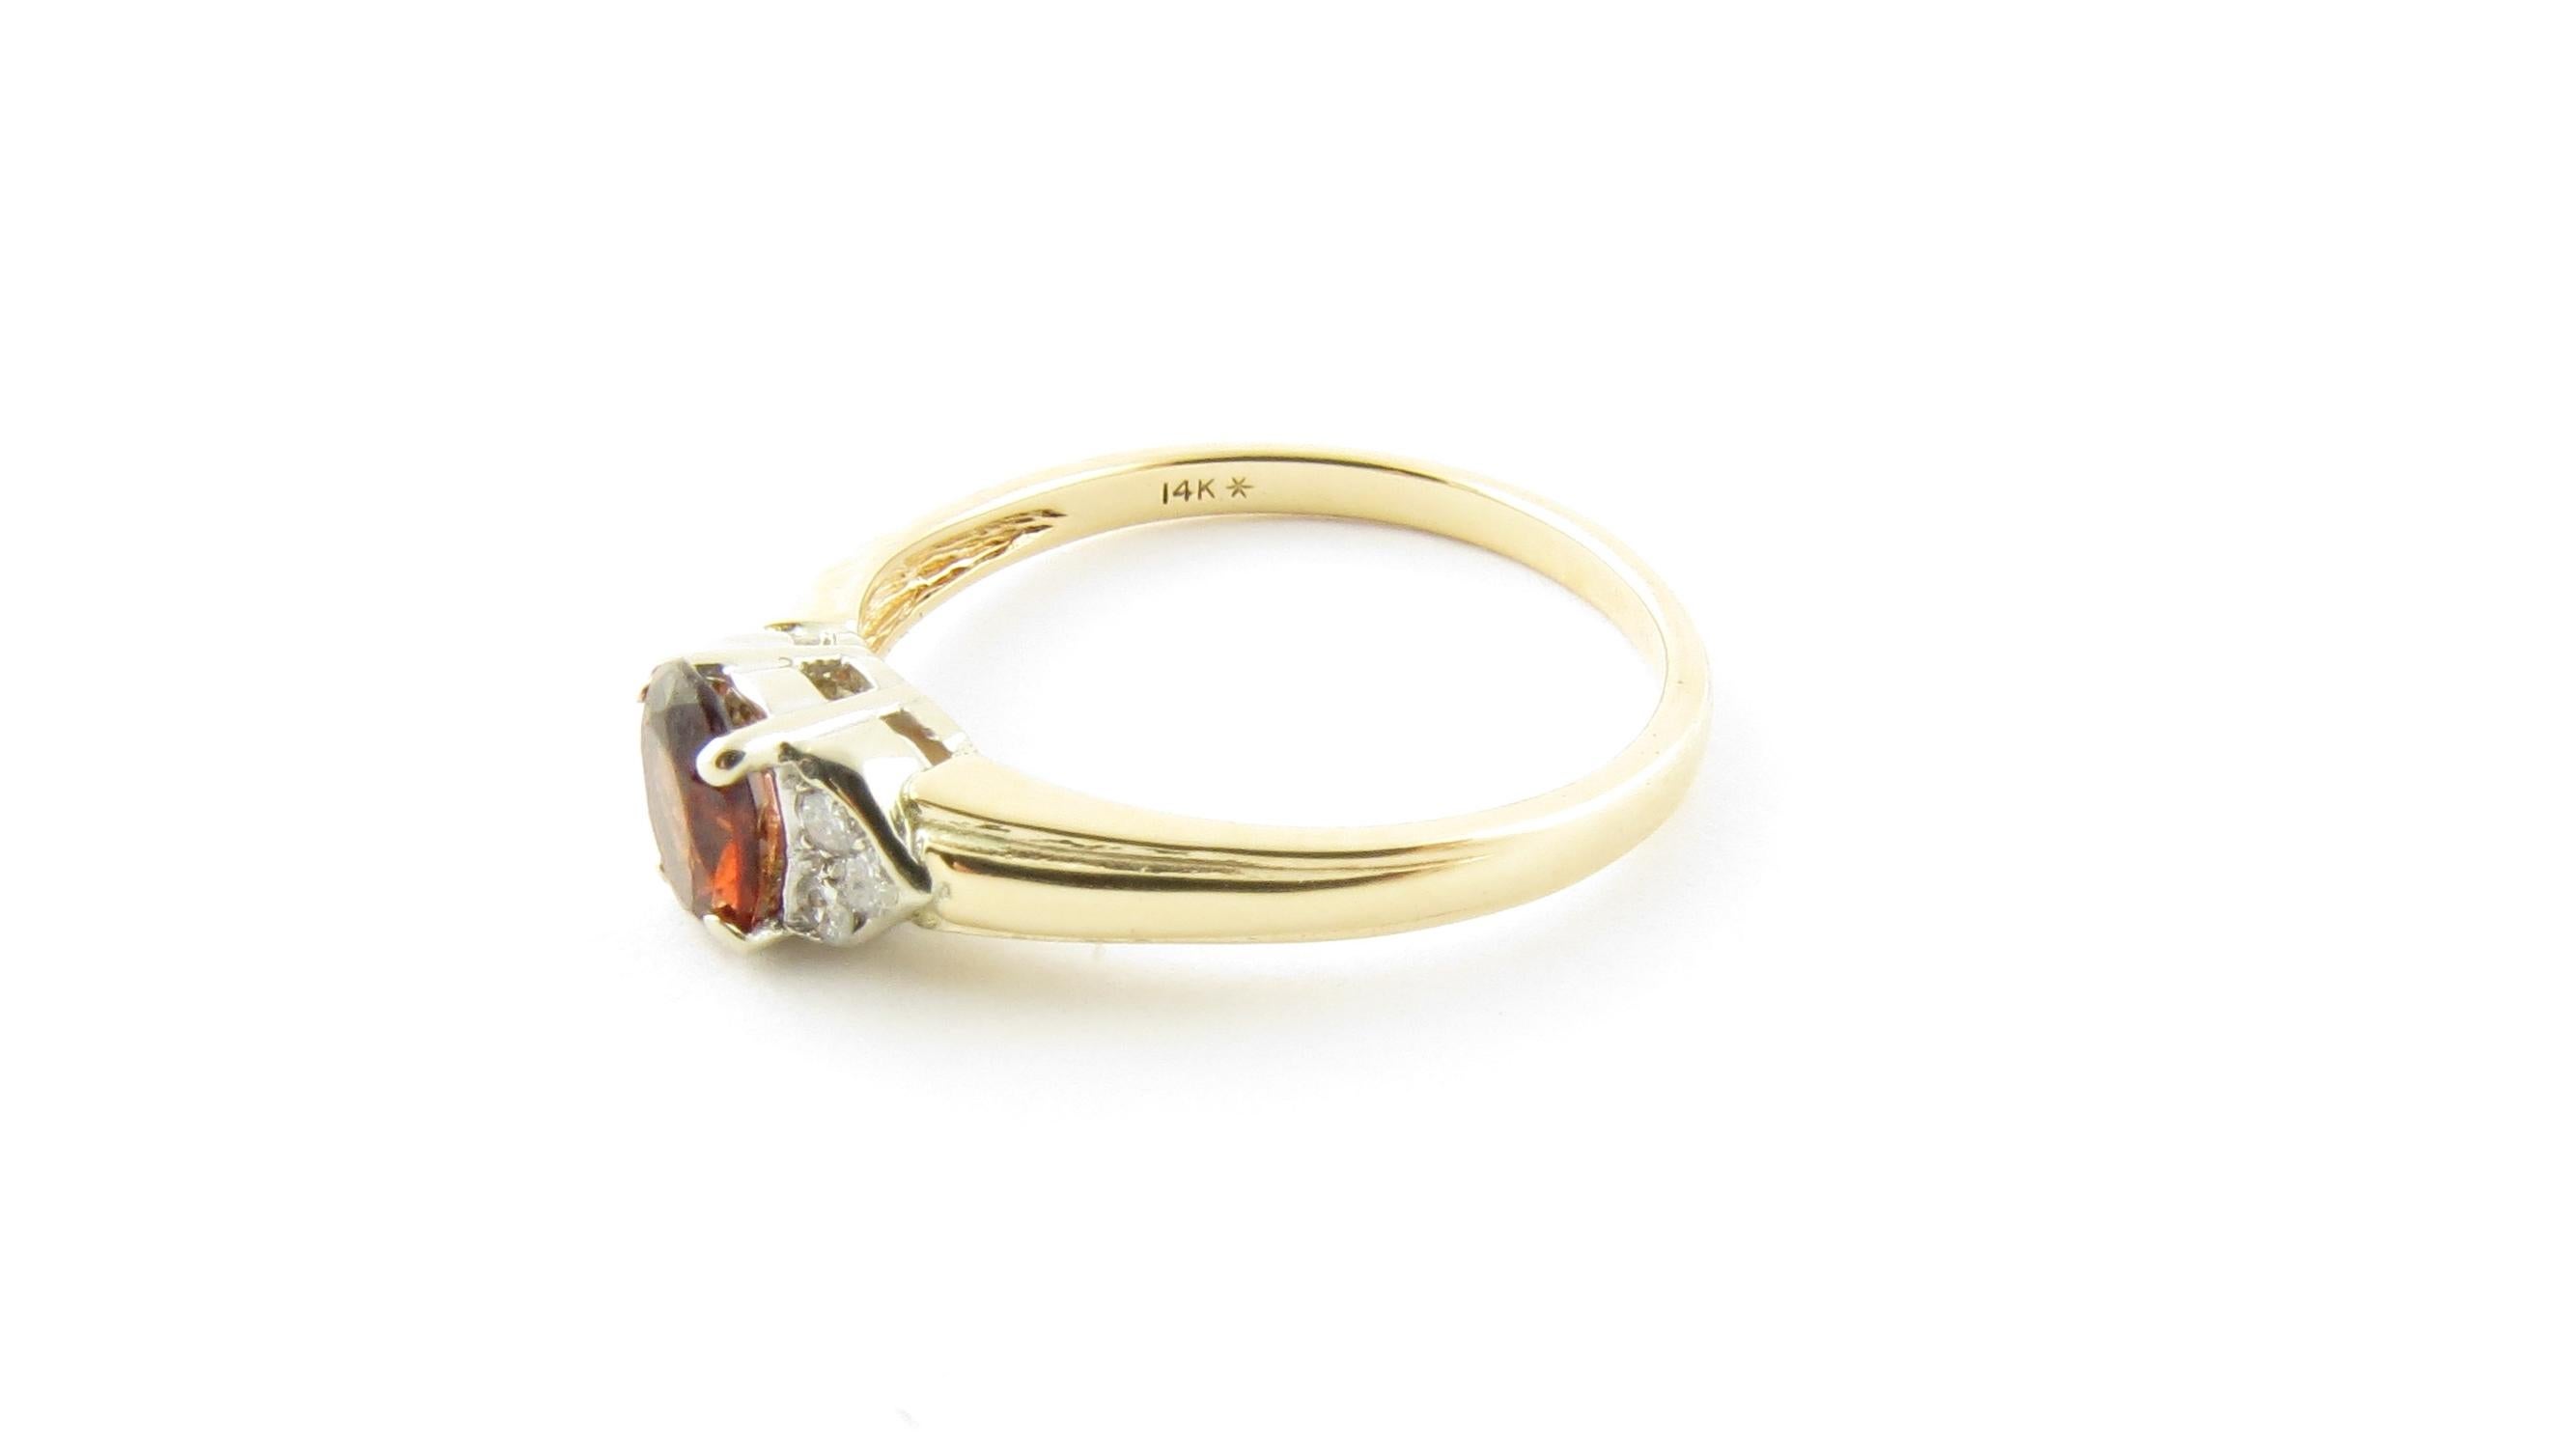 Vintage 14 Karat Yellow Gold Garnet and Diamond Ring Size 6.25

This lovely ring features one oval garnet (6 mm x 4 mm) accented with six round brilliant cut diamonds set in polished 14K yellow gold. Shank measures 1.5 mm.

Approximate total diamond